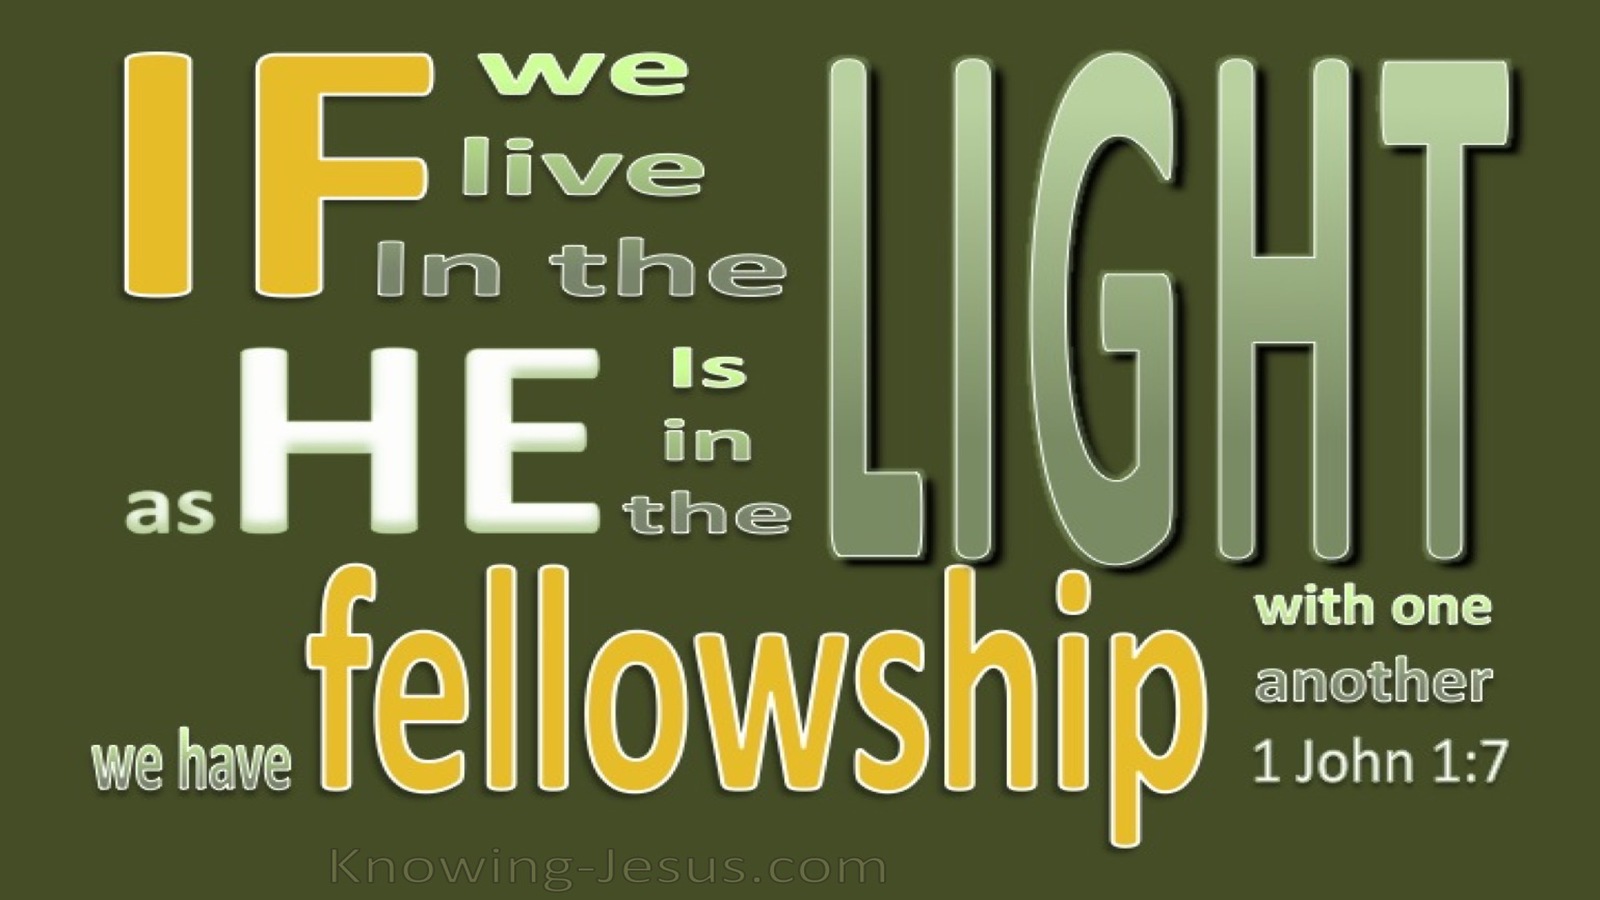 1 John 1:7 Fellowship With One Another (green)